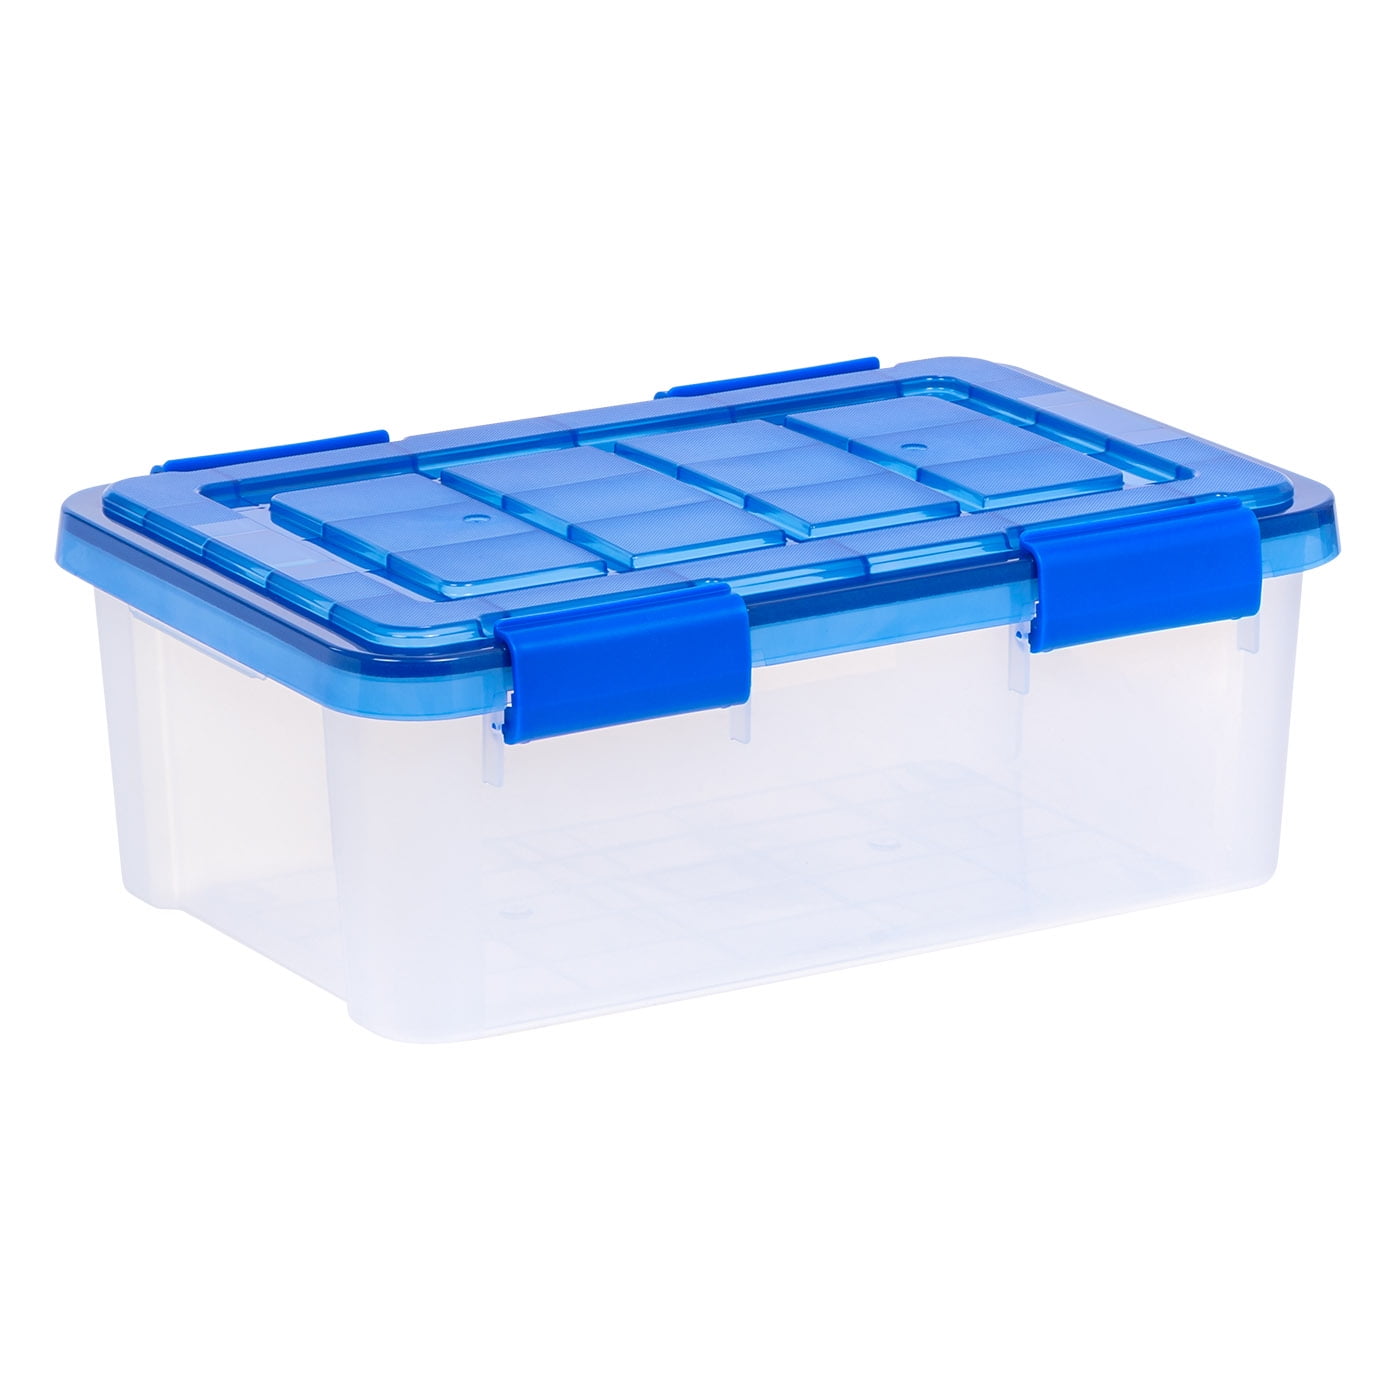 4pcs 16 Qt Portable Storage Bins with Lids - Small Plastic Containers for  Toy, Sundry, and Cosmetic Organization